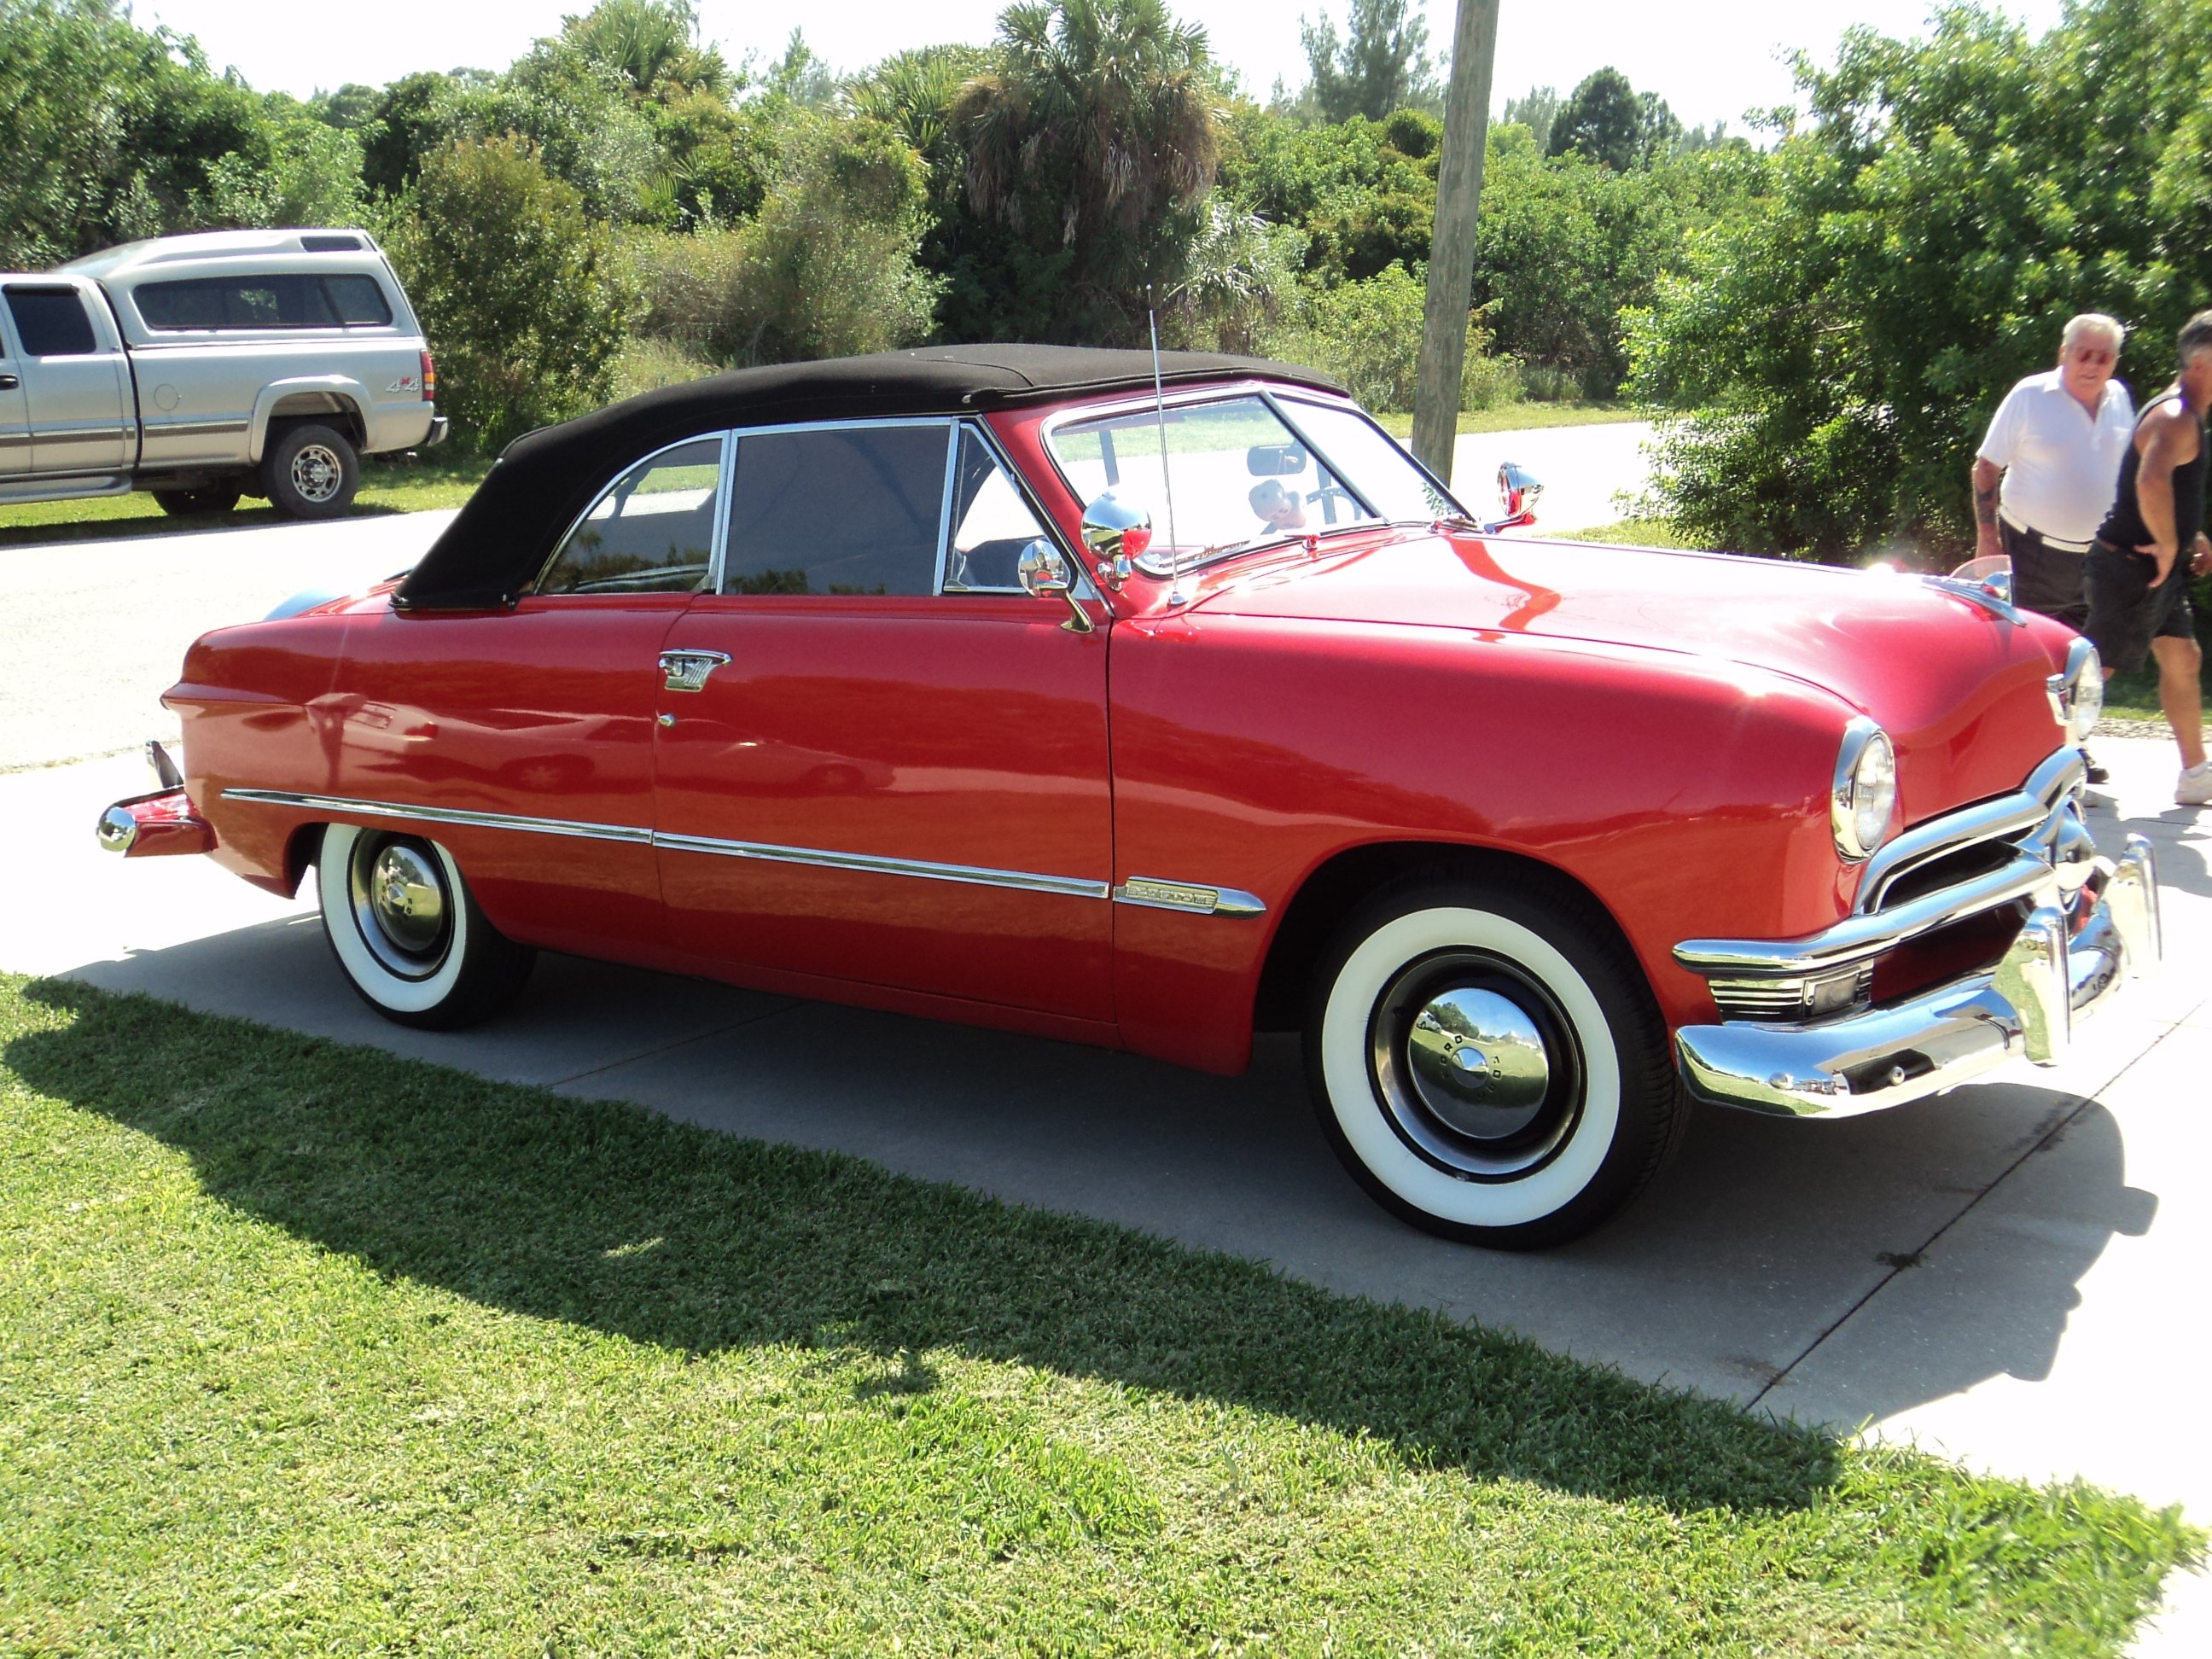 1950, Ford, Custonline, Deluxe, Convertible, Red, Classic, Old, Vintage, Original, Usa, 2592x1944 10 Wallpaper